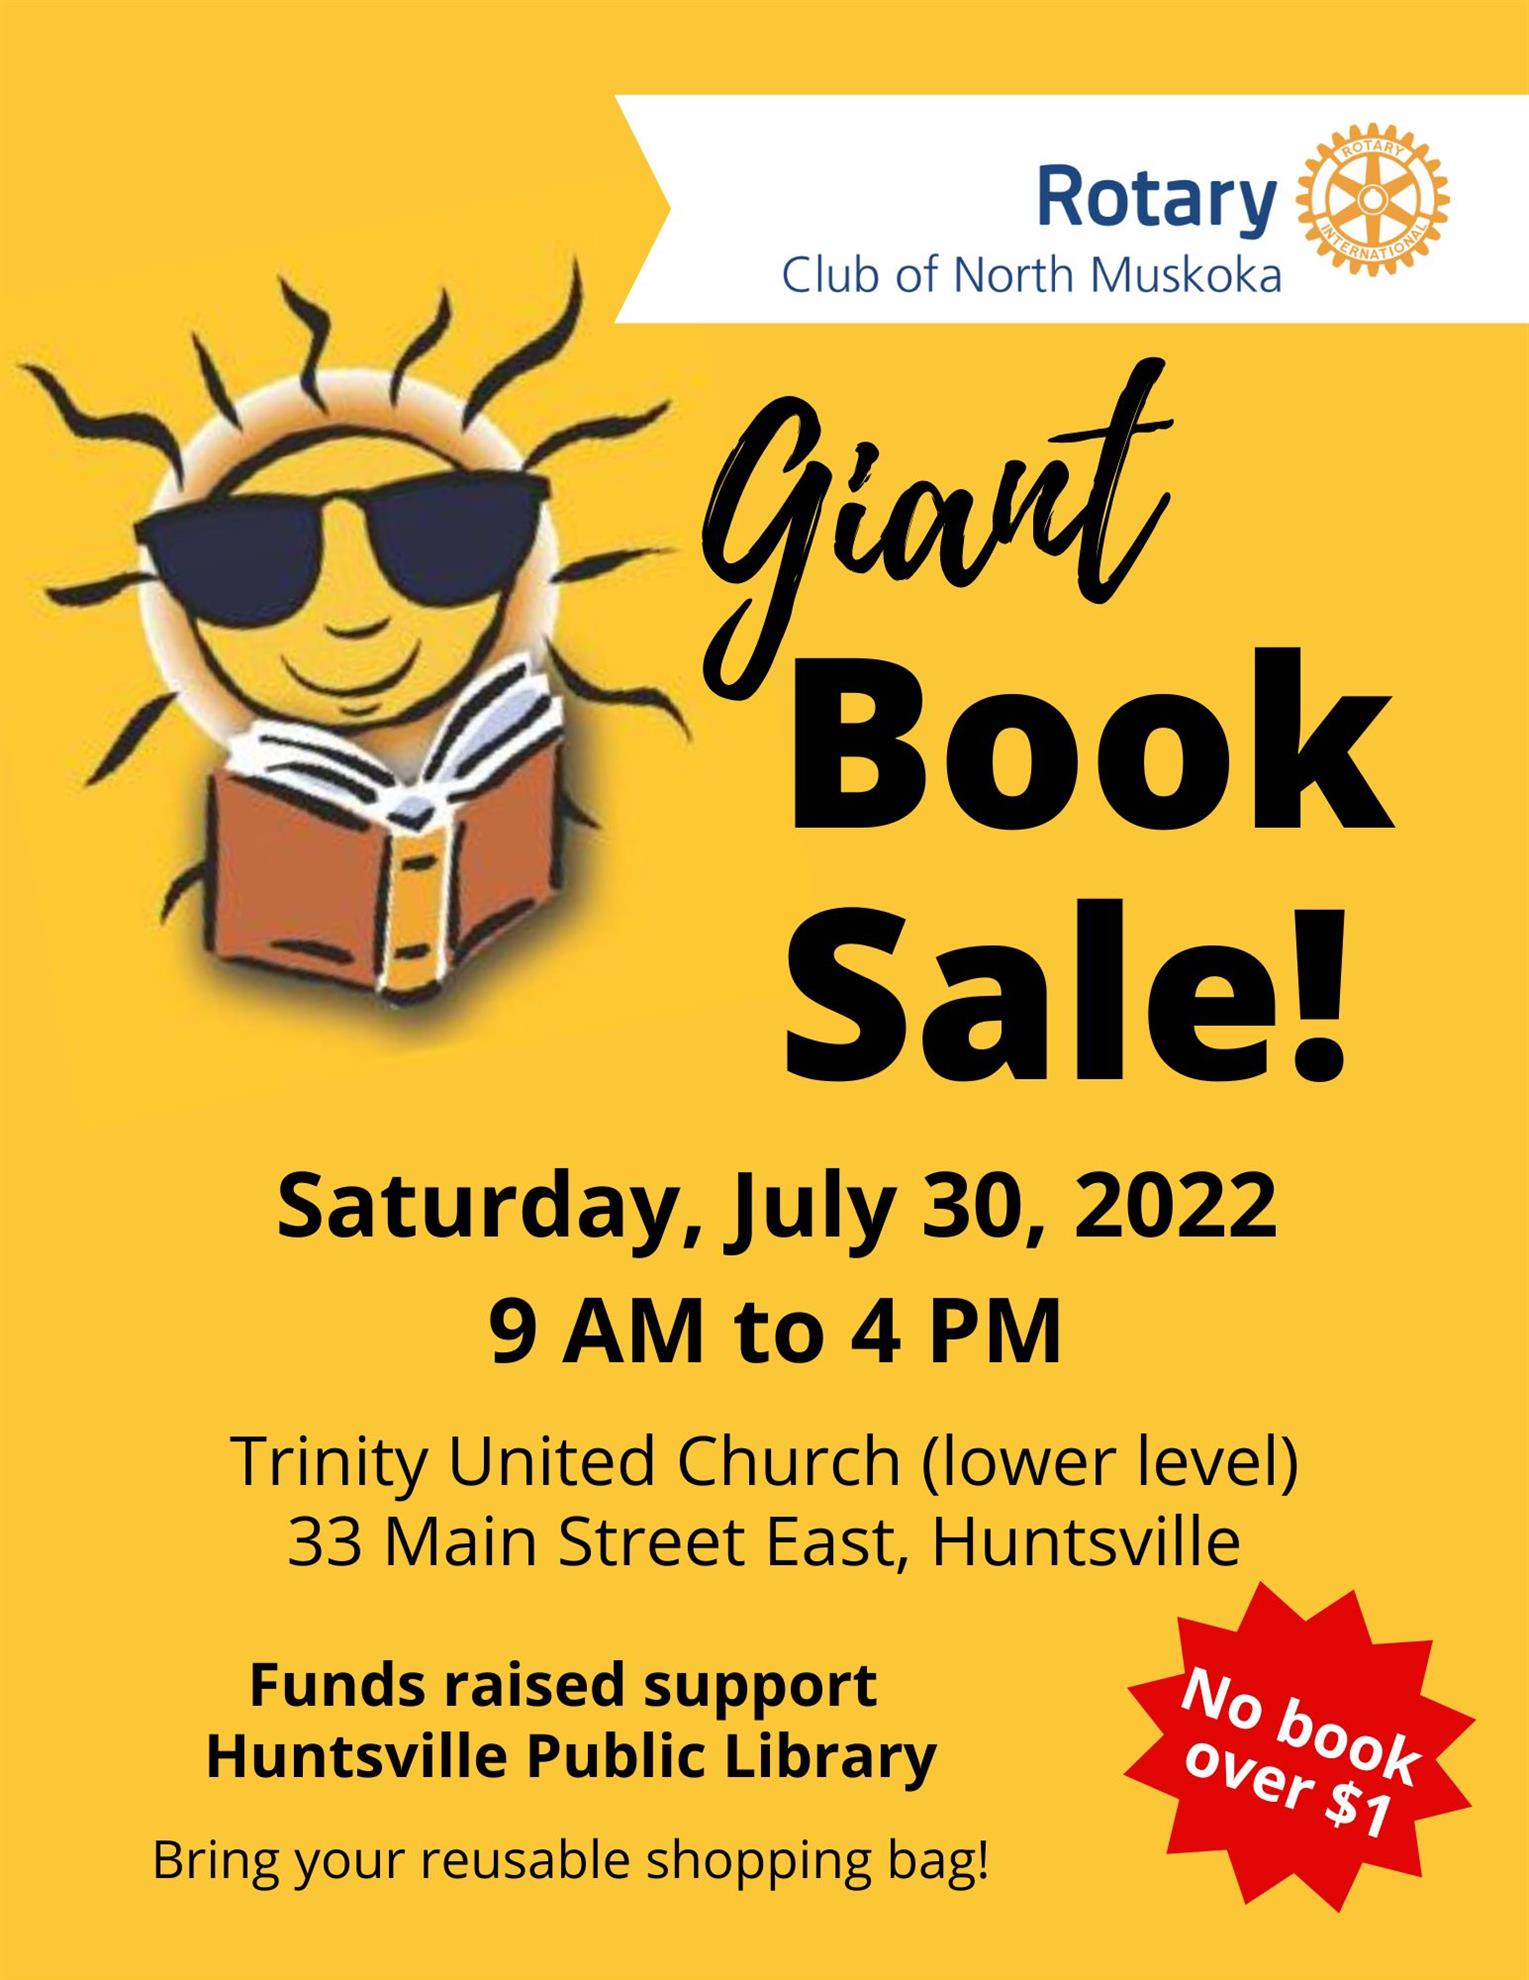 A poster for the Giant Rotary Book Sale happening Saturday, July 30, 2022.